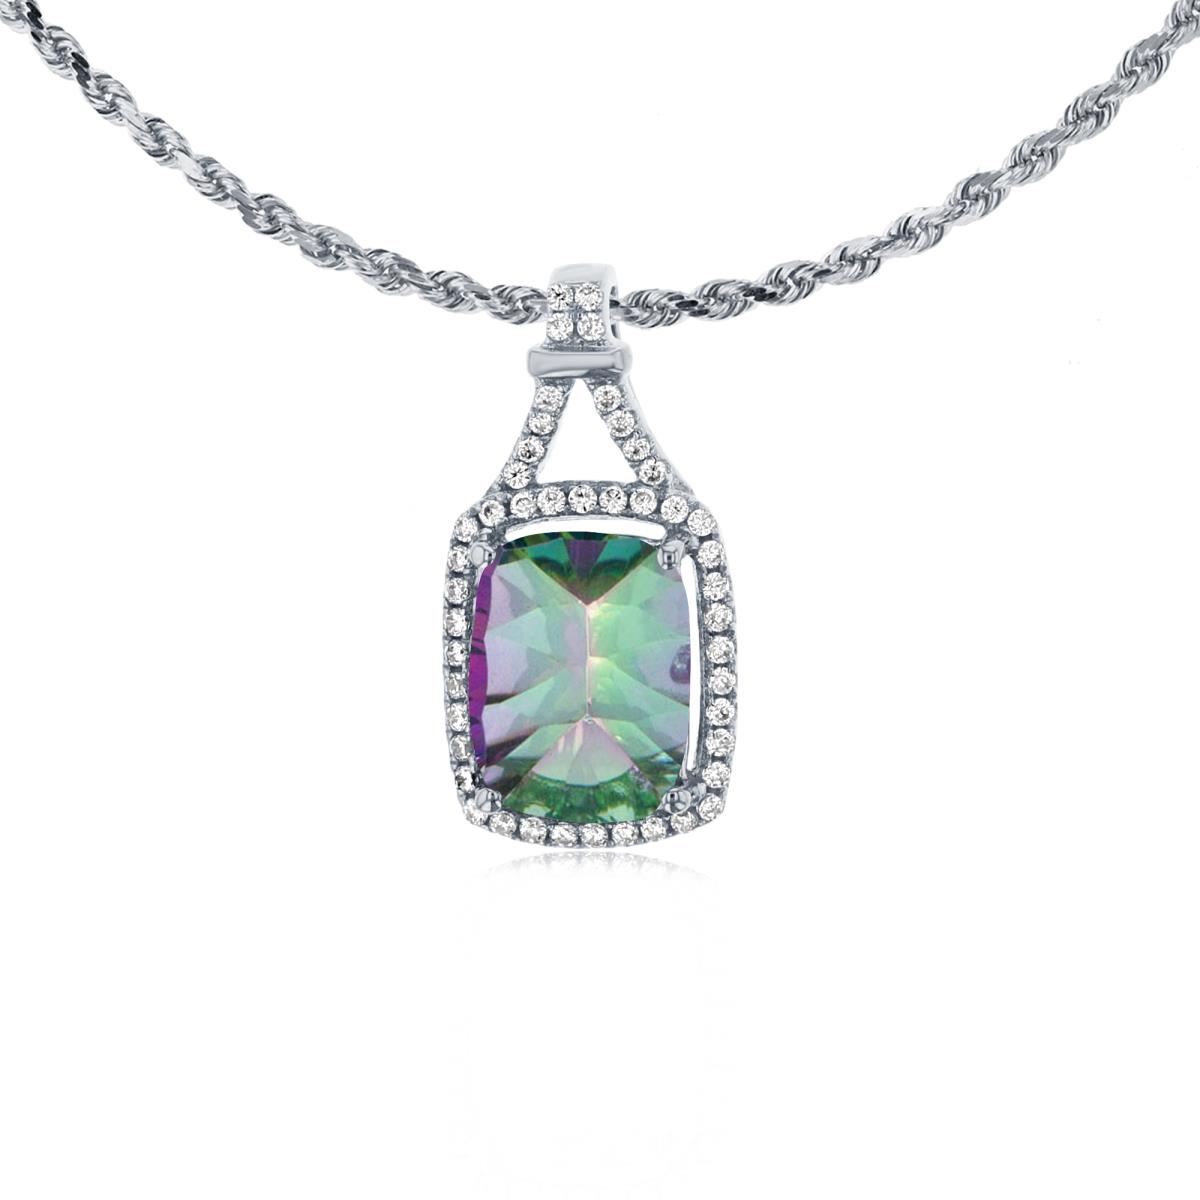 10K White Gold 8x6mm Cushion Mystic Green Topaz & 0.13 CTTW Rd Diamonds Halo 18" Rope Chain Necklace